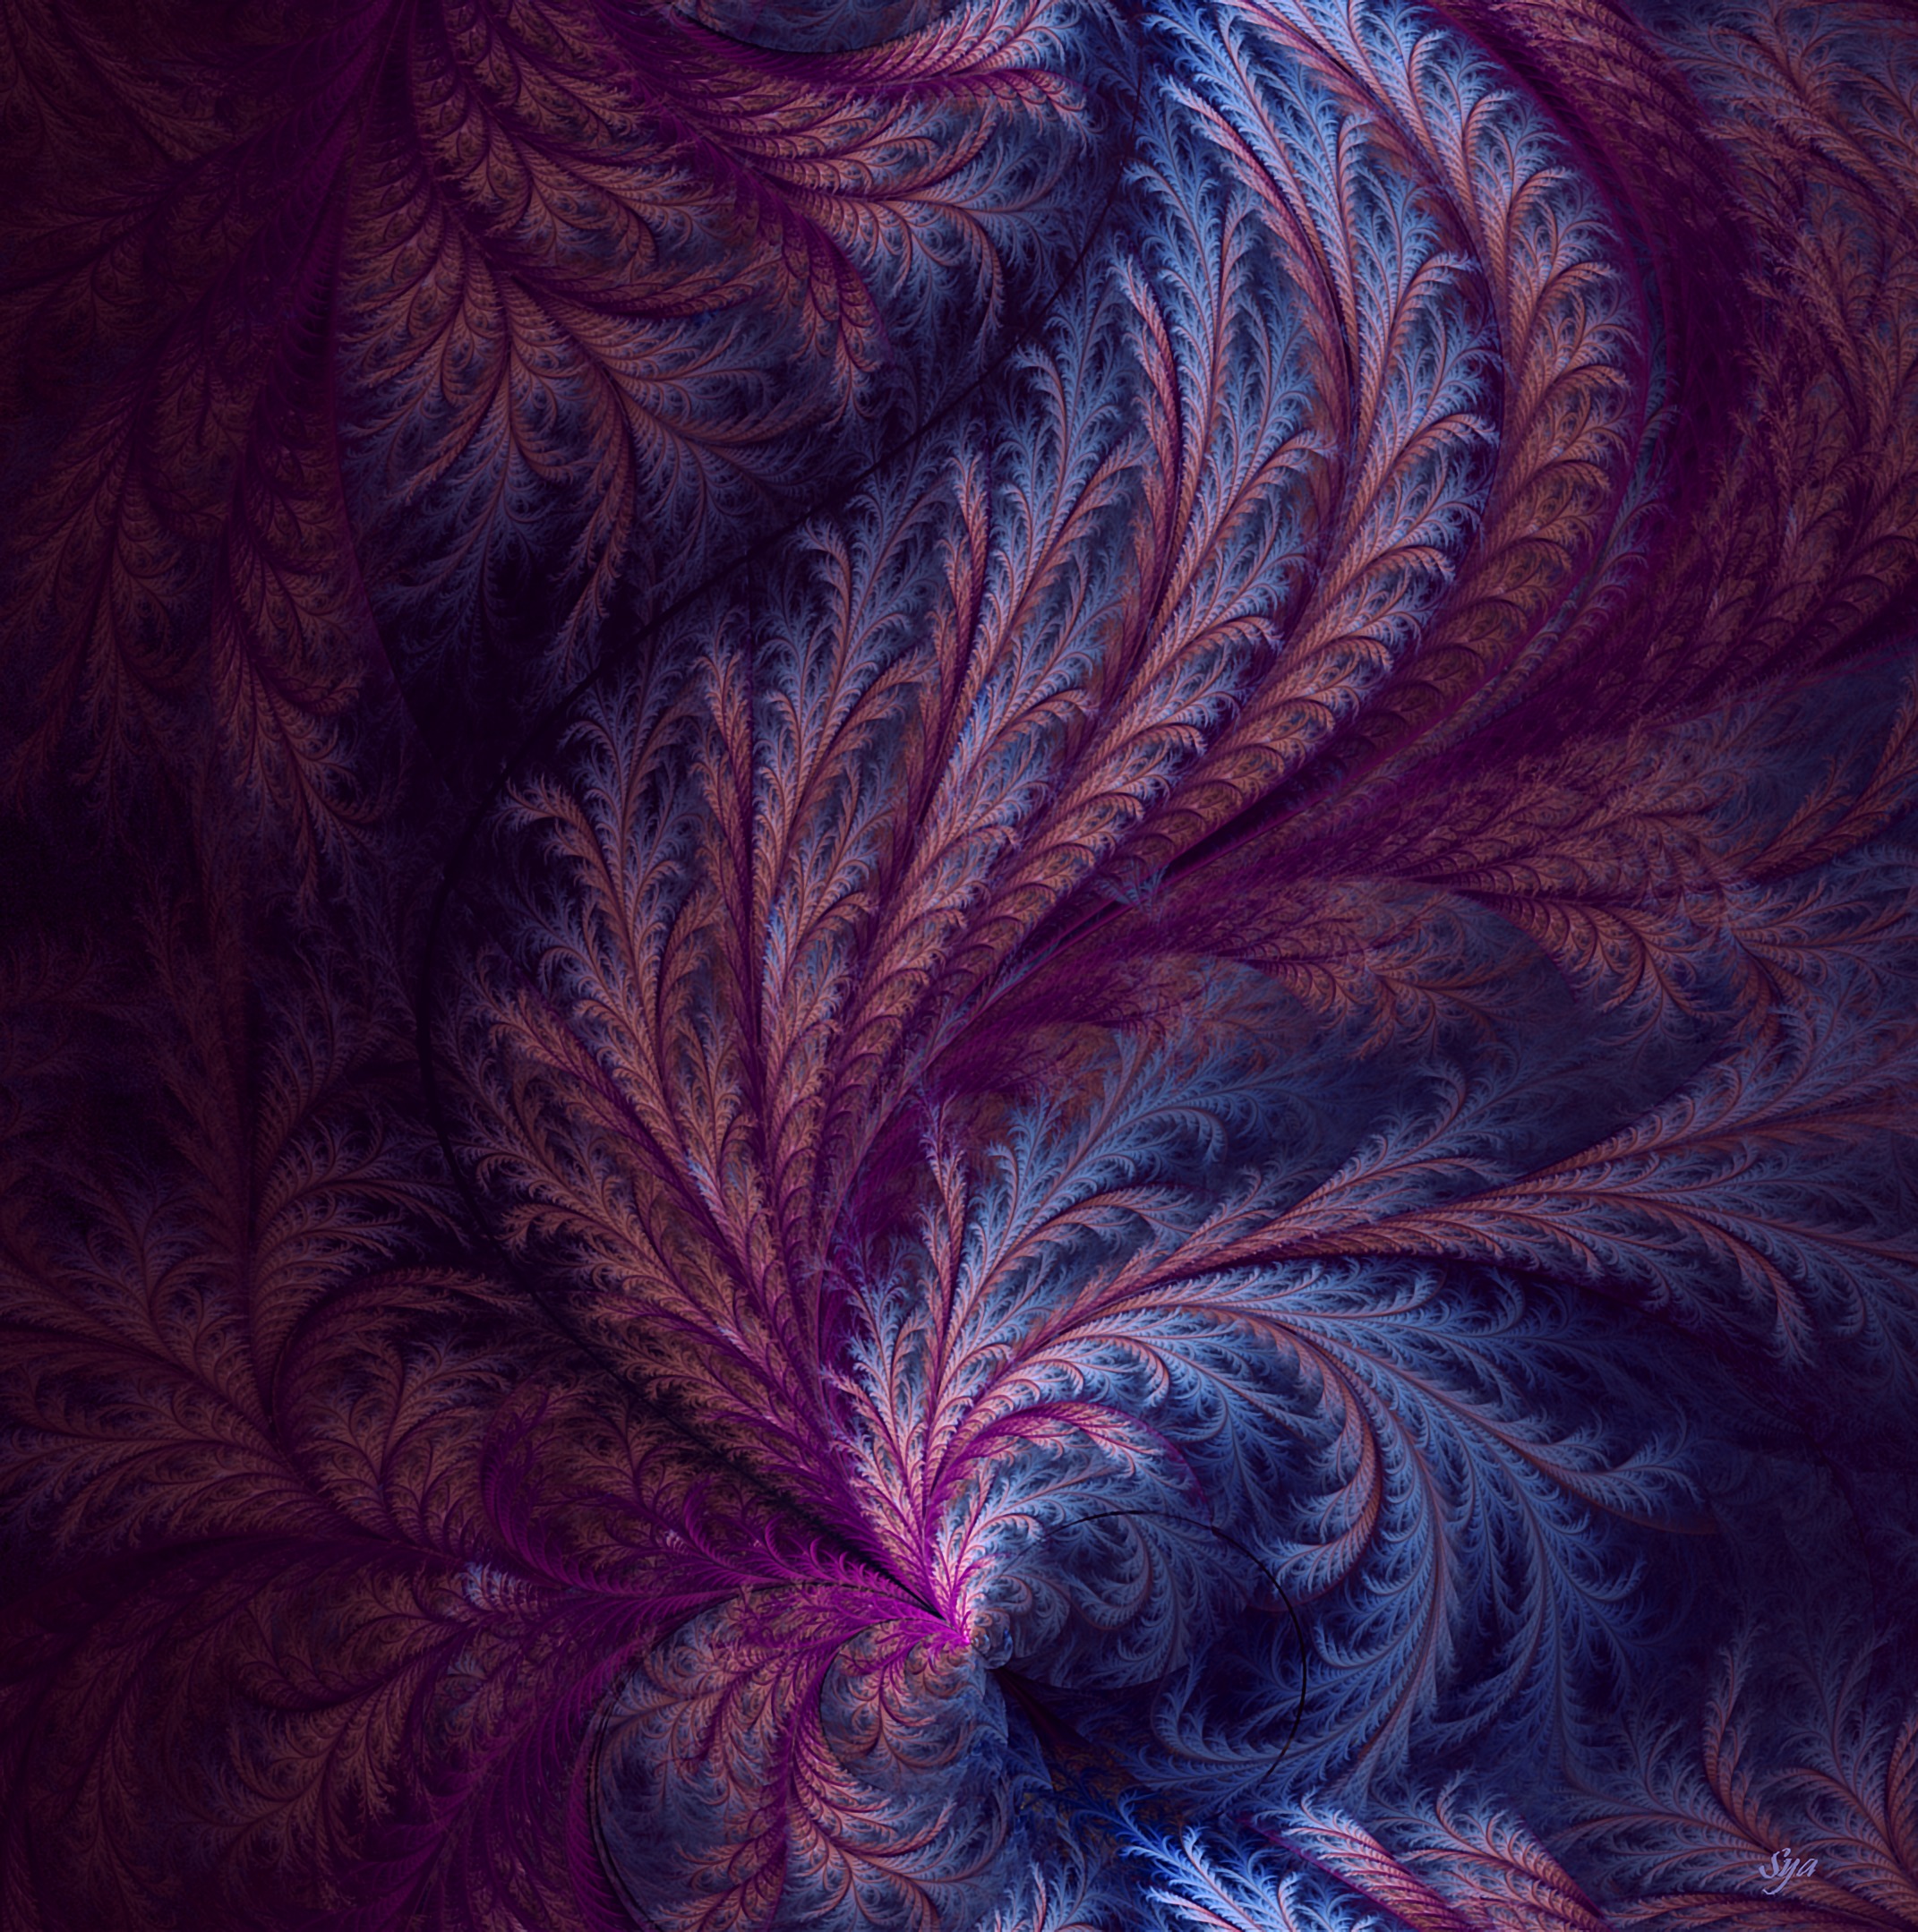 fractal, pattern, intricate, confused, branchy, abstract, branched phone background